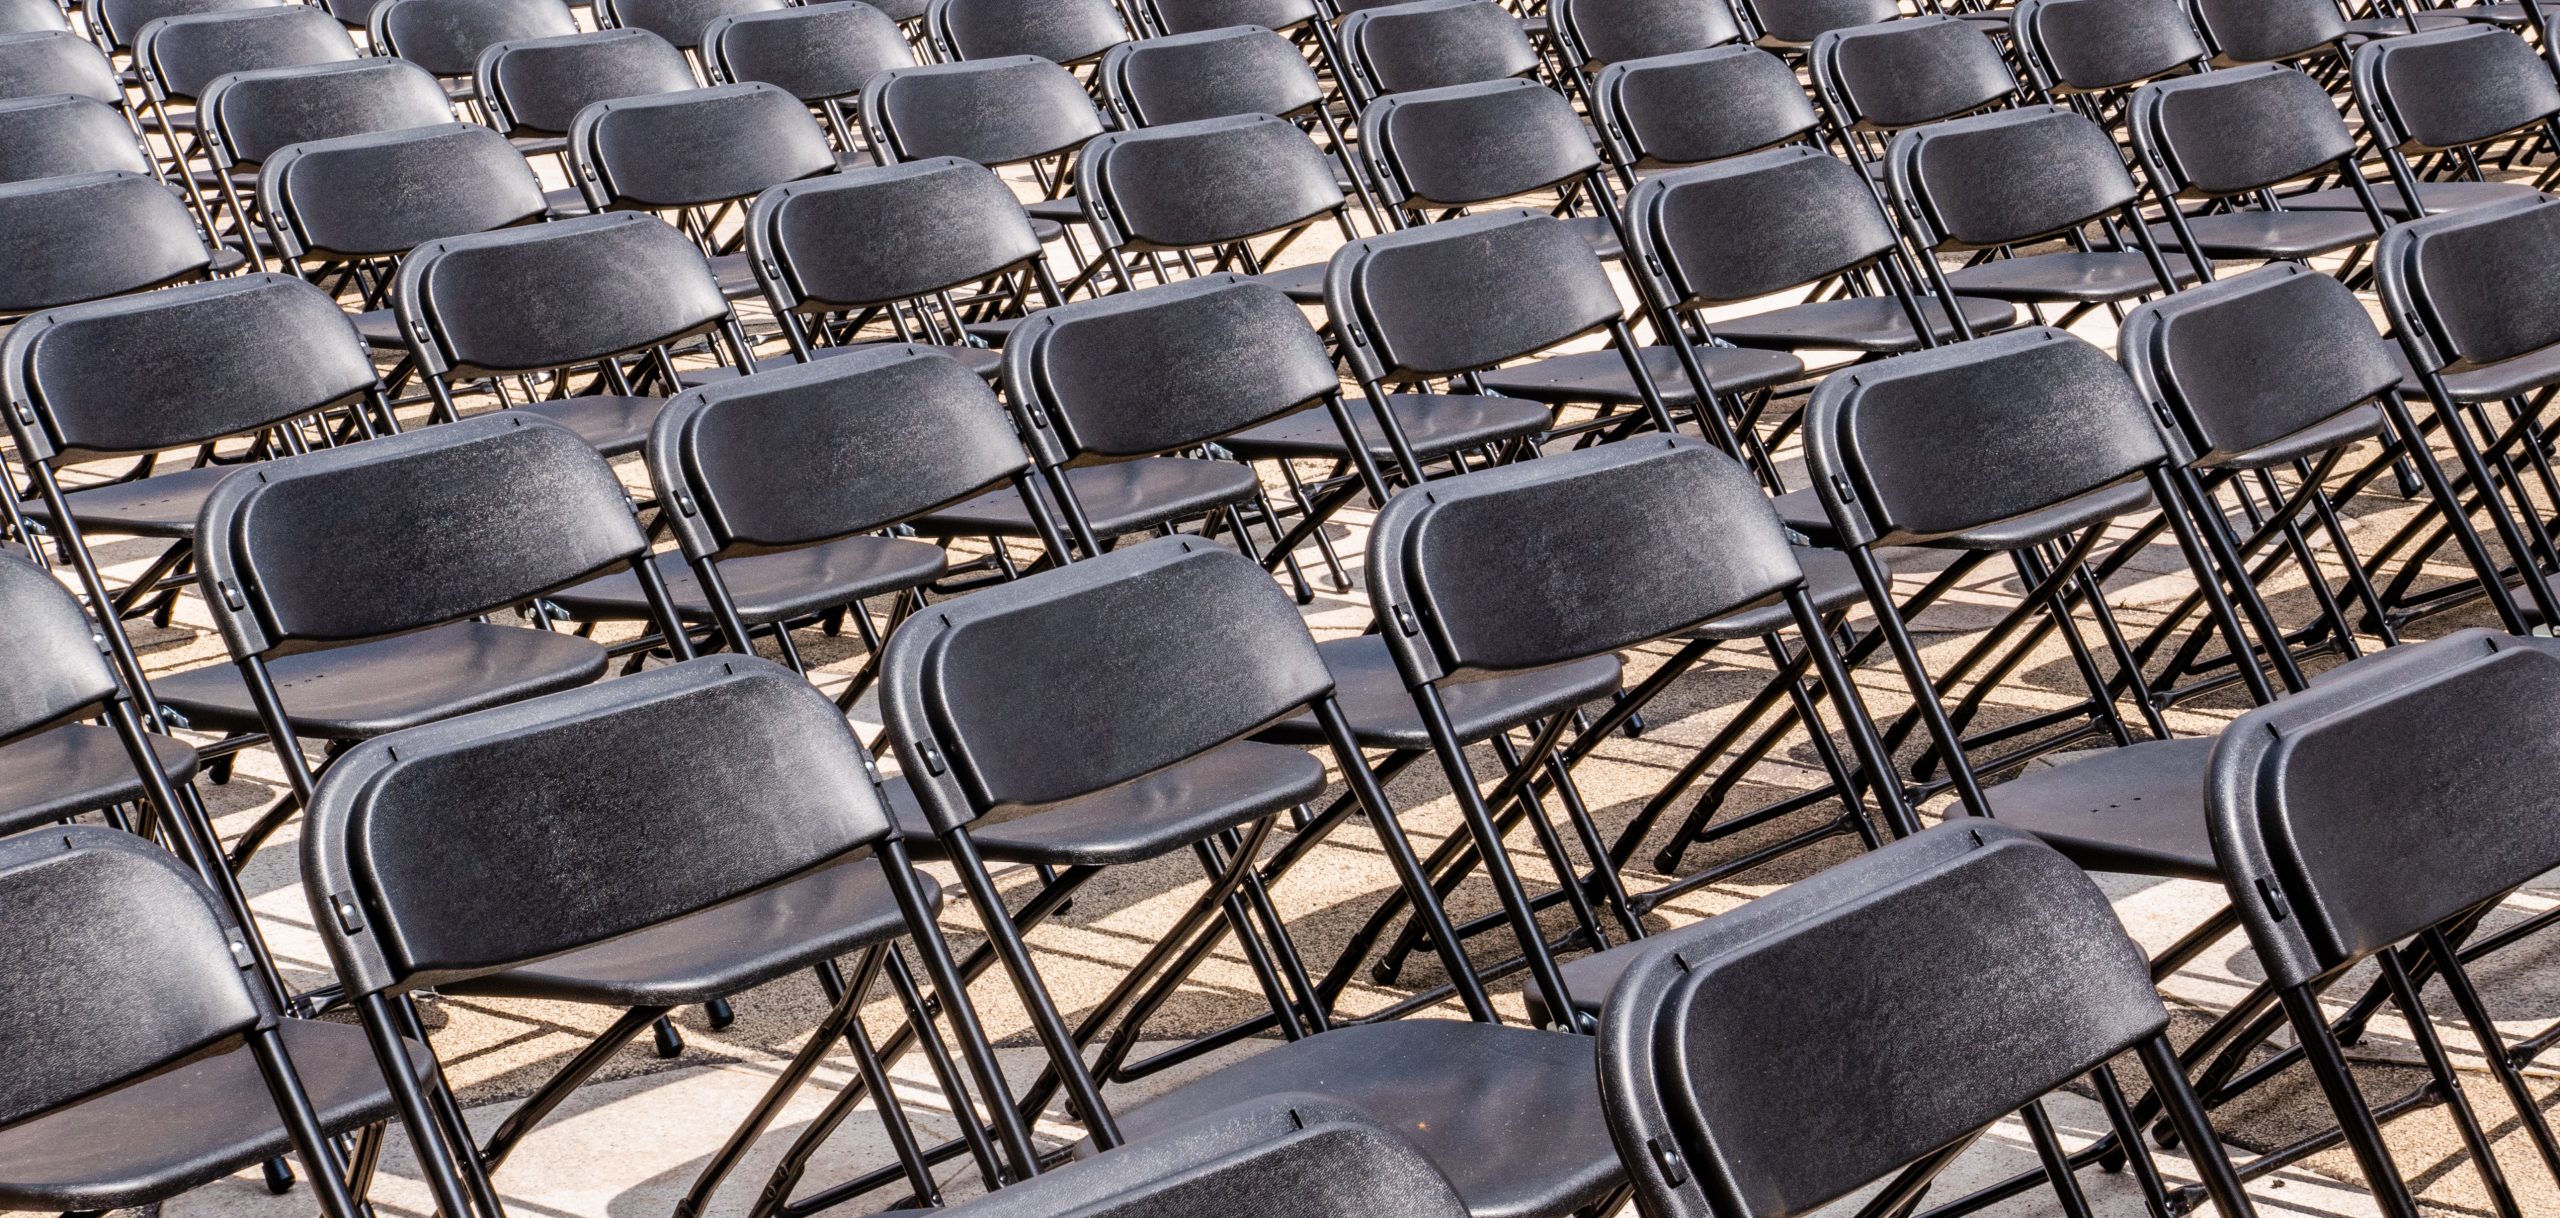 rows and rows of black chairs, as if they are organised for a mass event